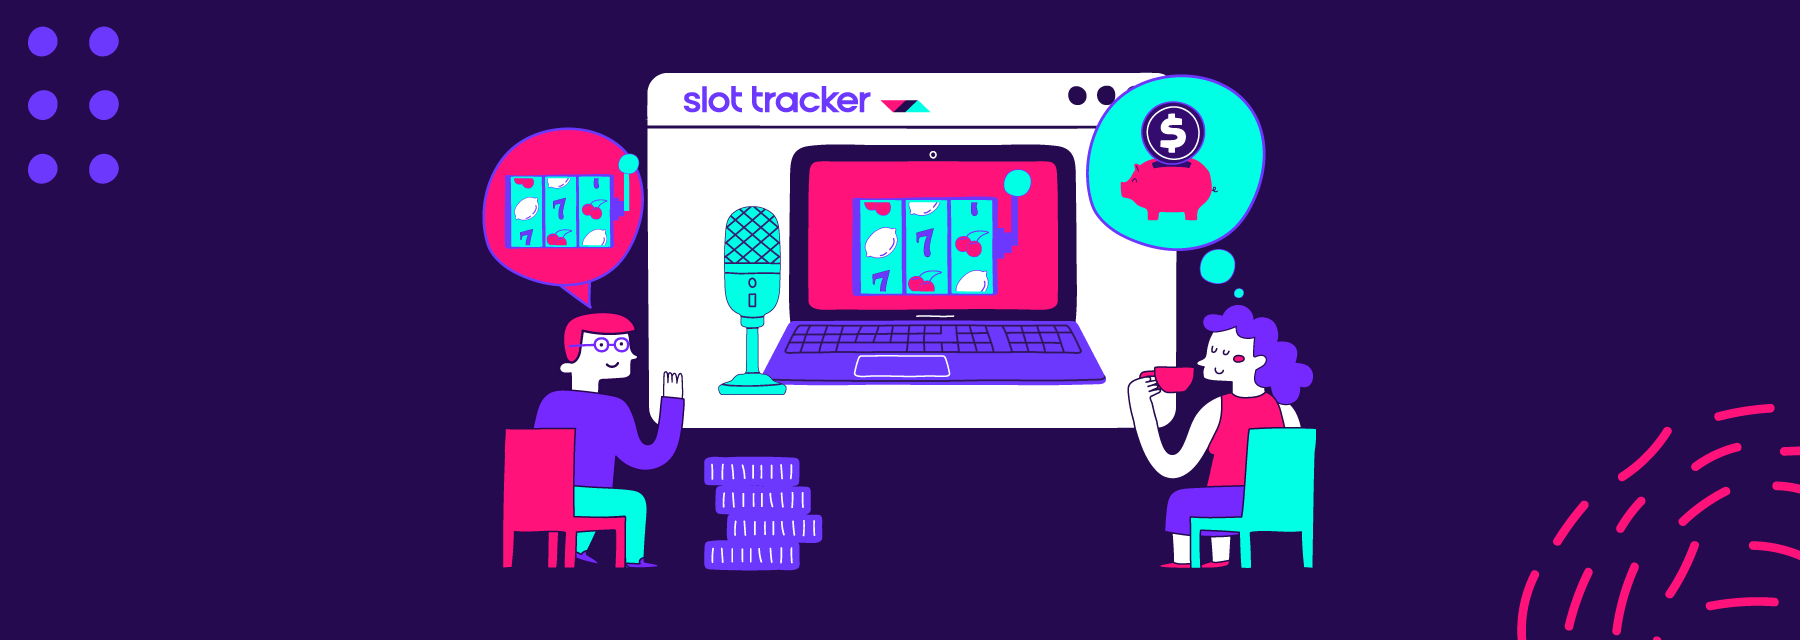 See how Slot Tracker works live on Twitch this May!